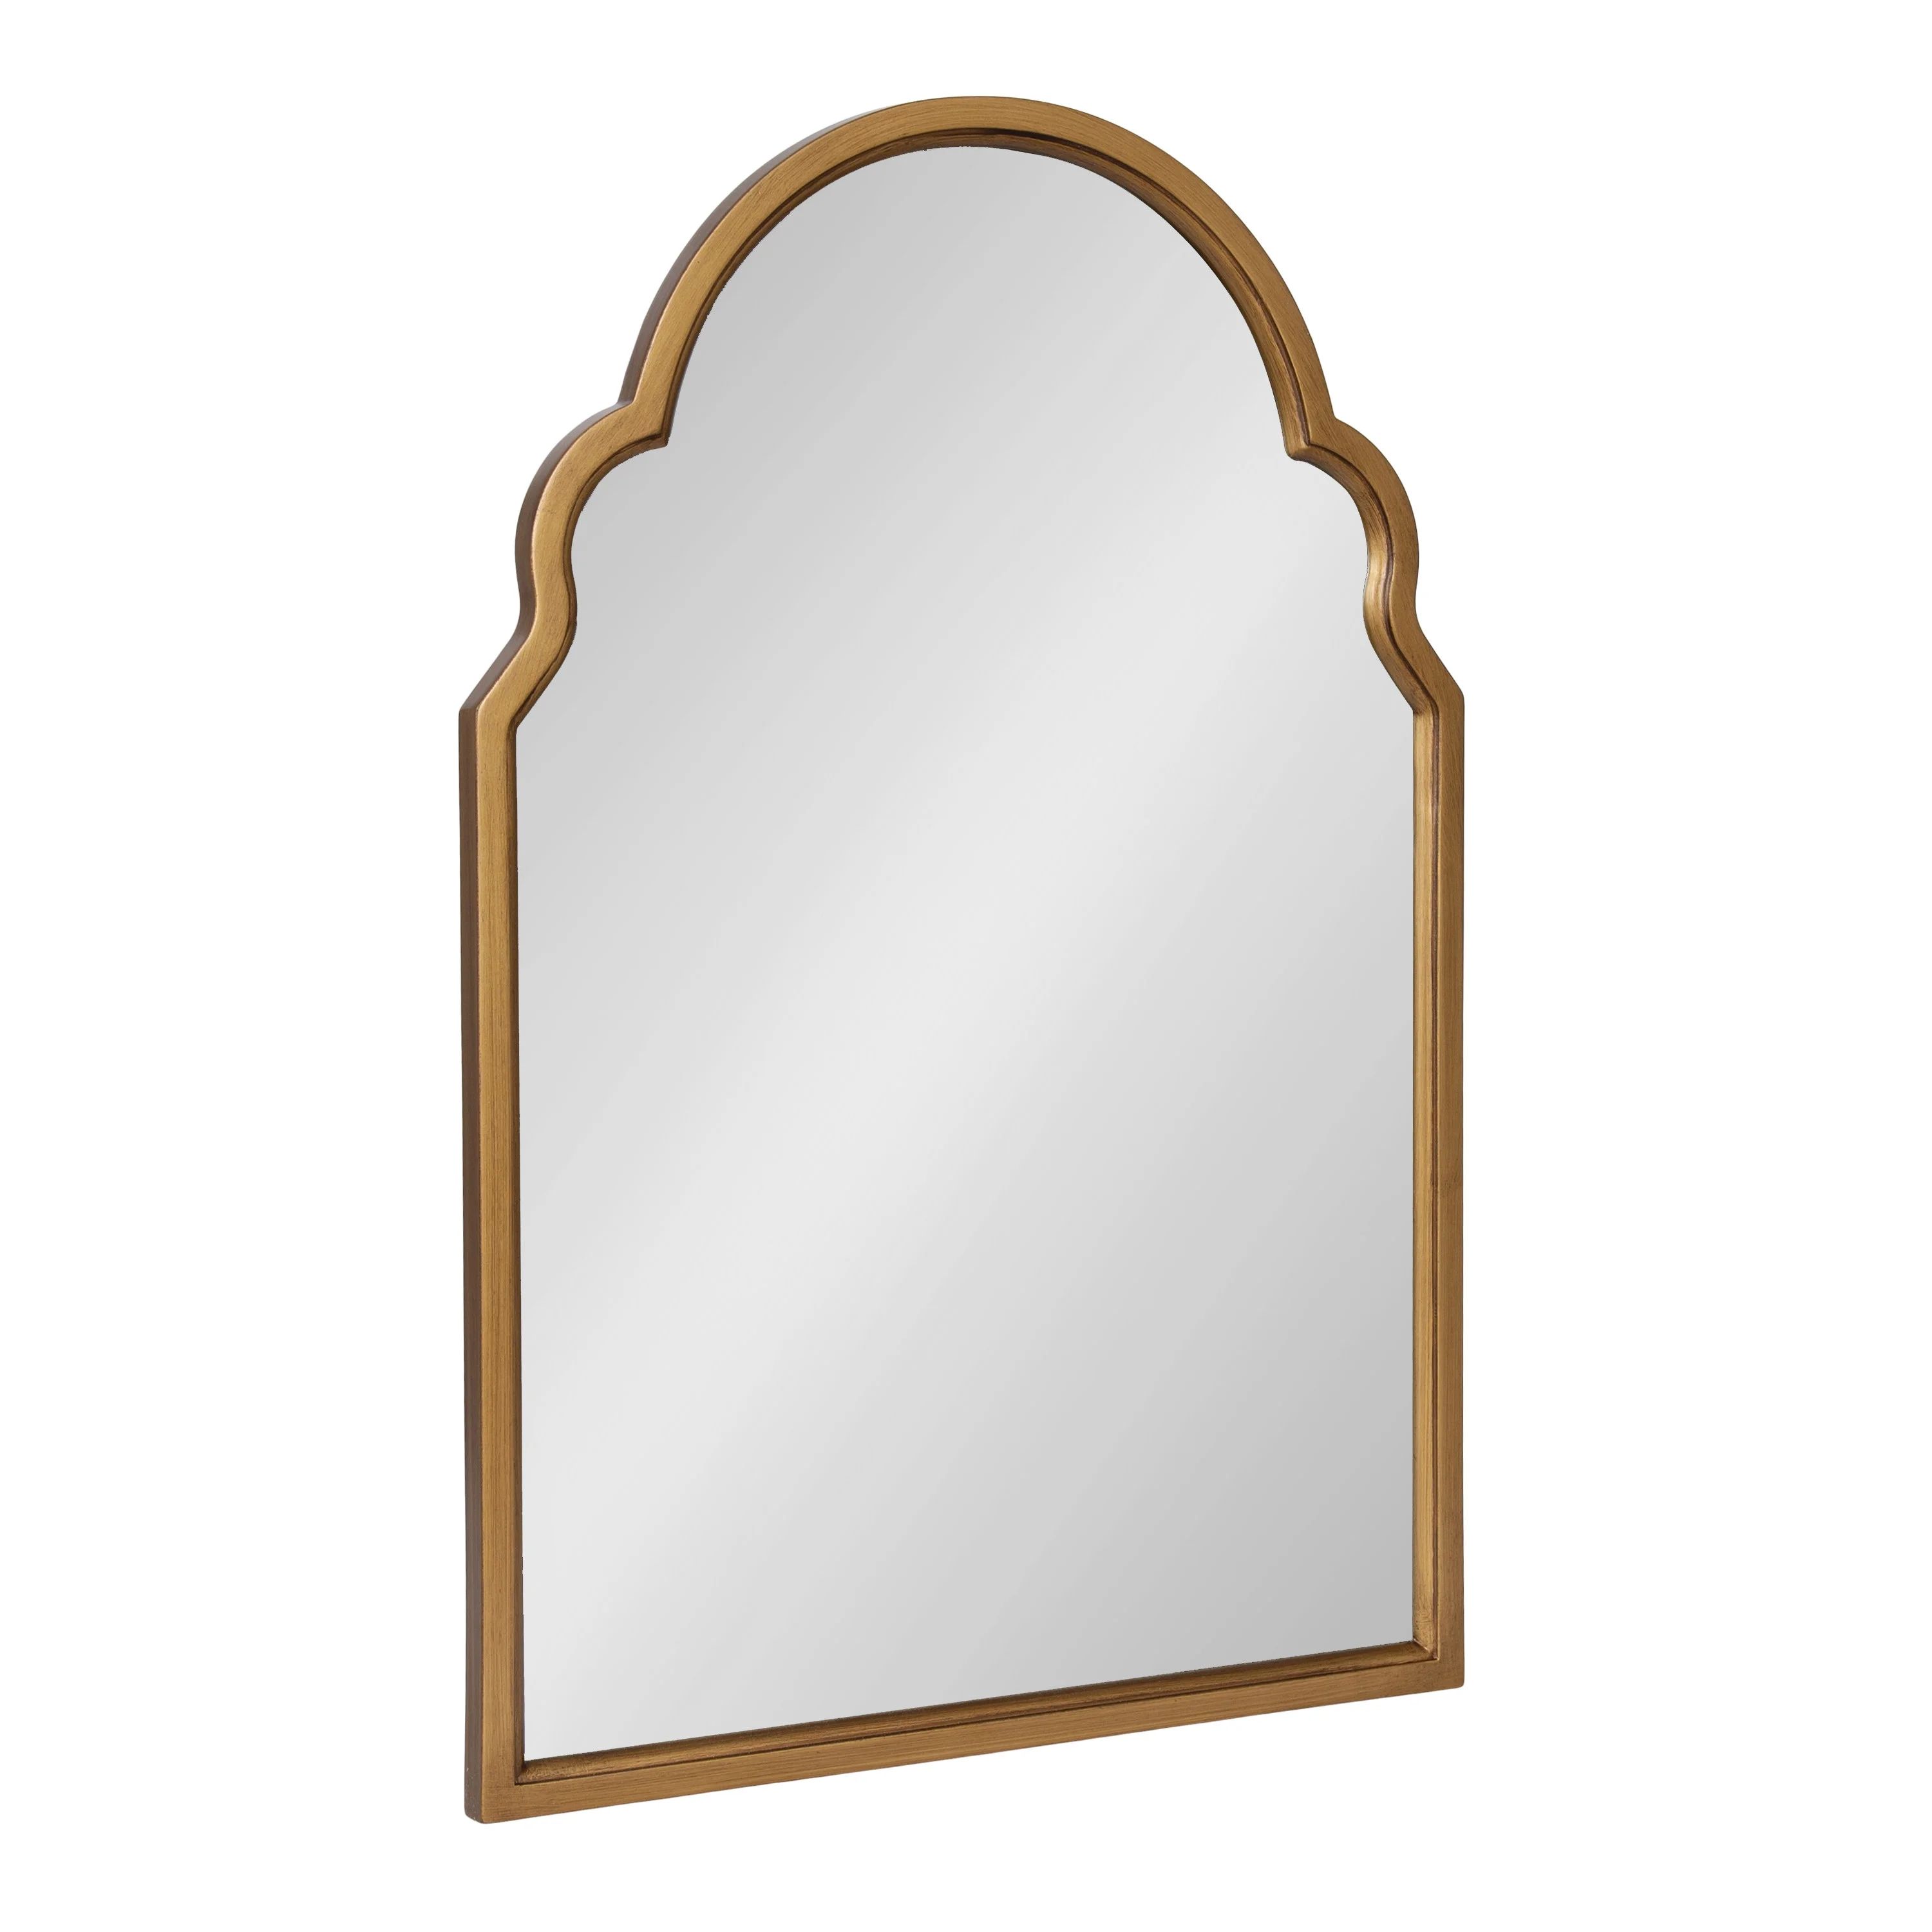 Kate and Laurel Hogan Wooden Arched Wall Mirror, 20 x 30, Gold, Vintage Glam Moroccan Arch Wood M... | Walmart (US)